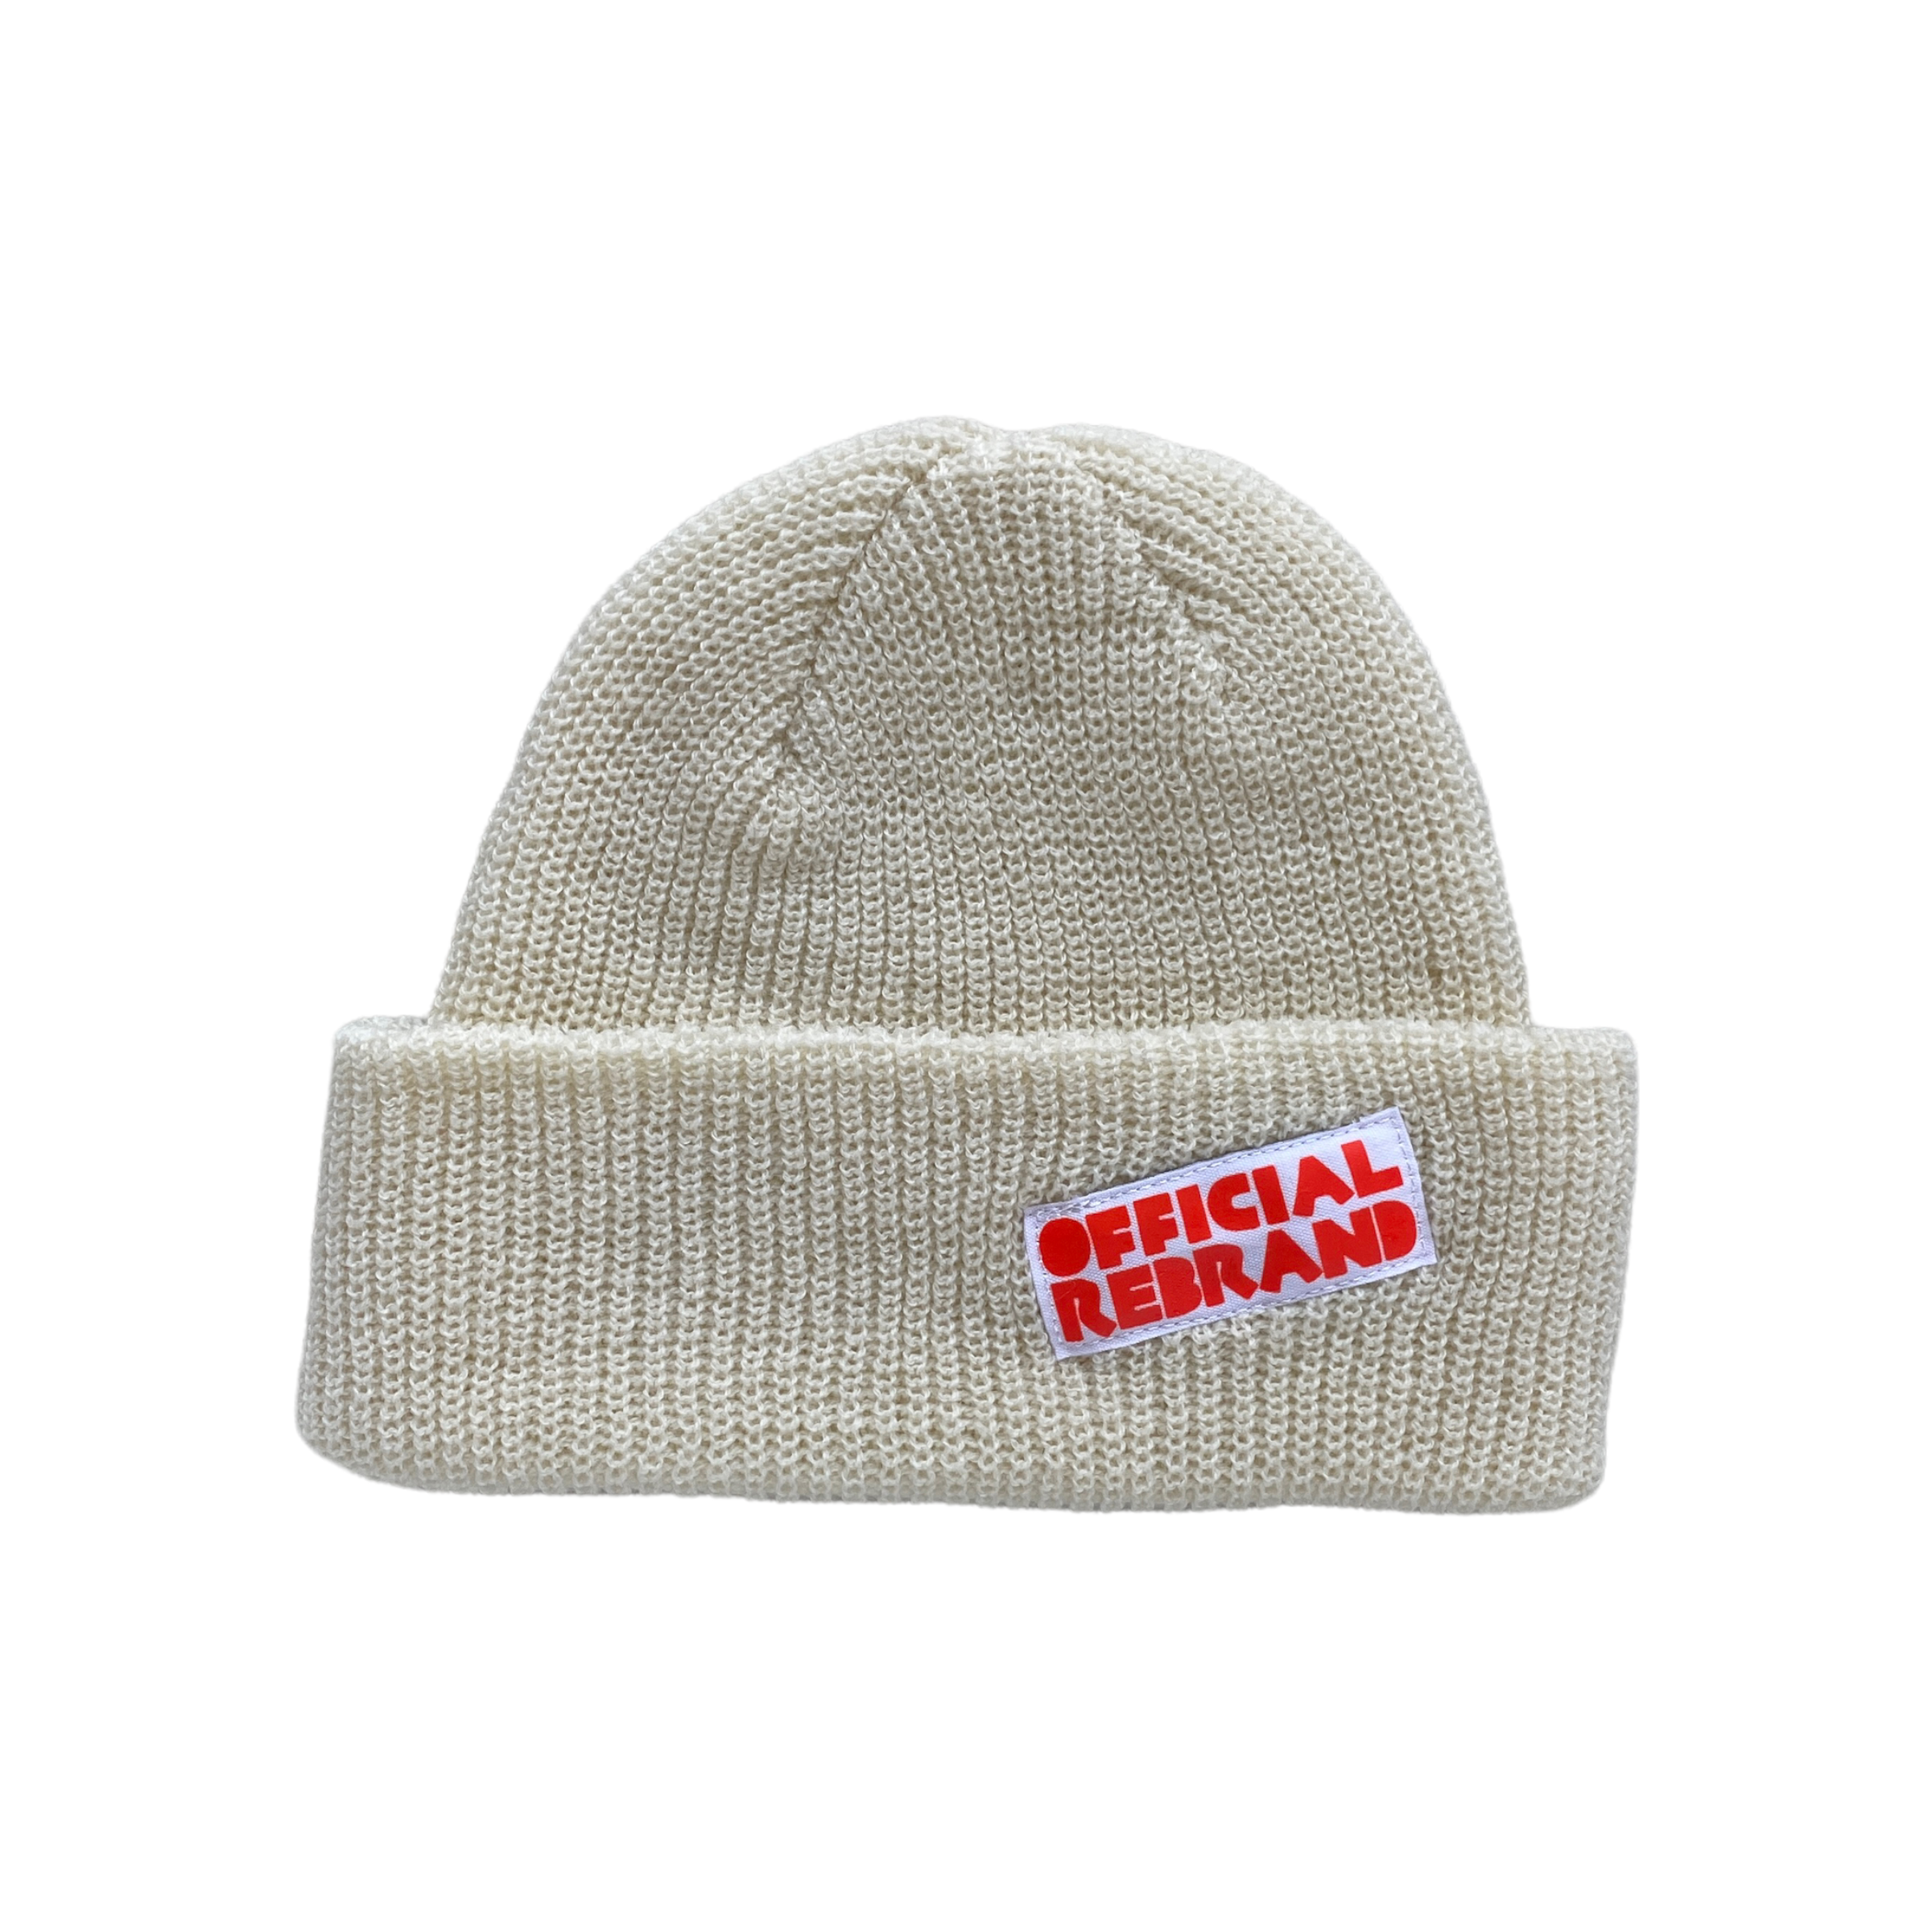 back of white cream wool beanie with tag reading OFFICIAL REBRAND in red